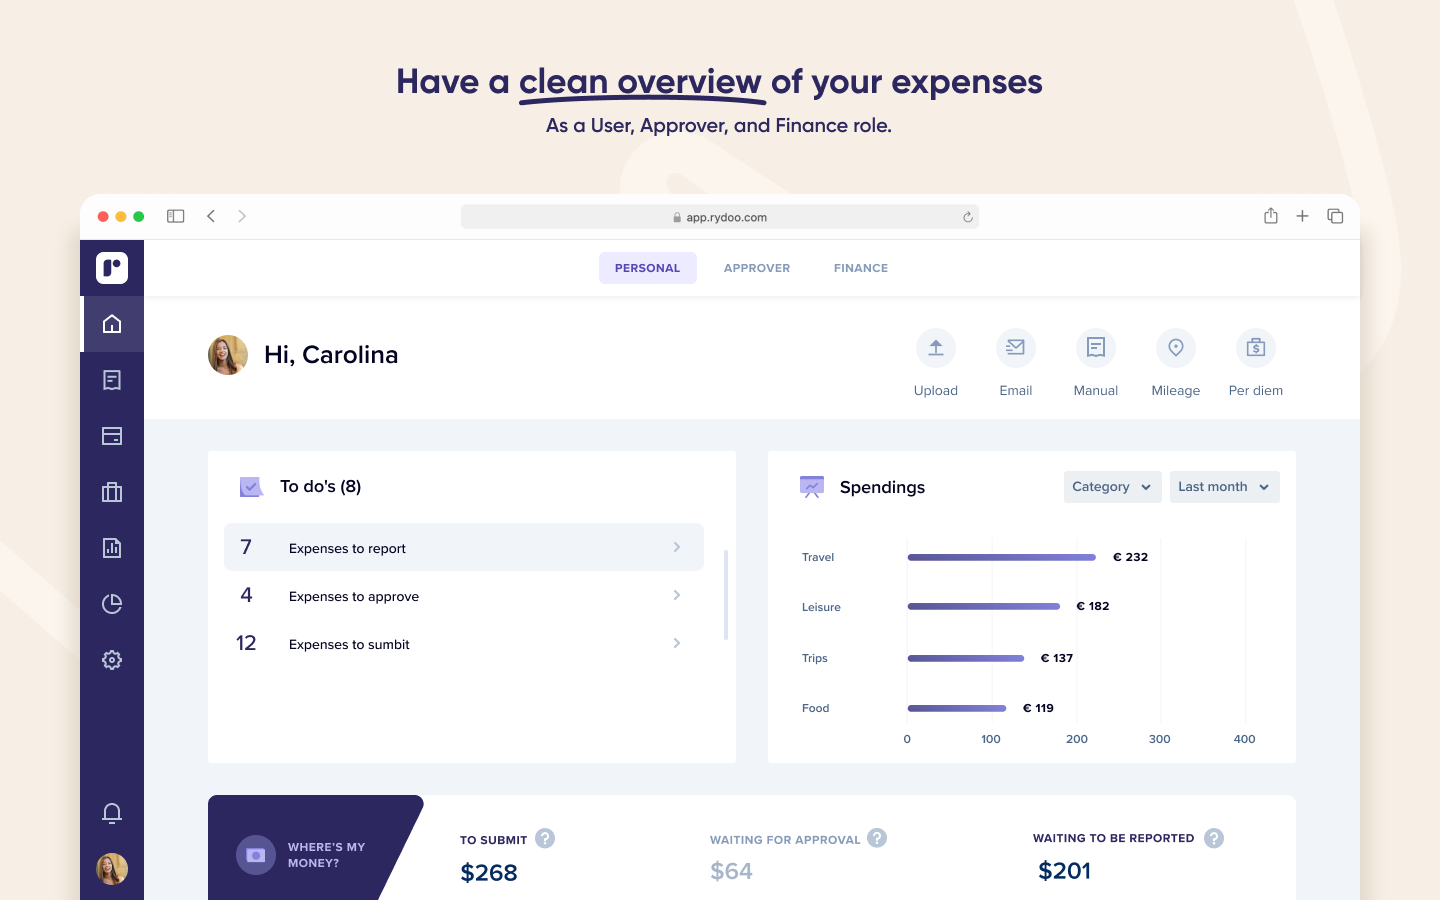 Have a clean overview of your expenses: As a user, approver and finance role.